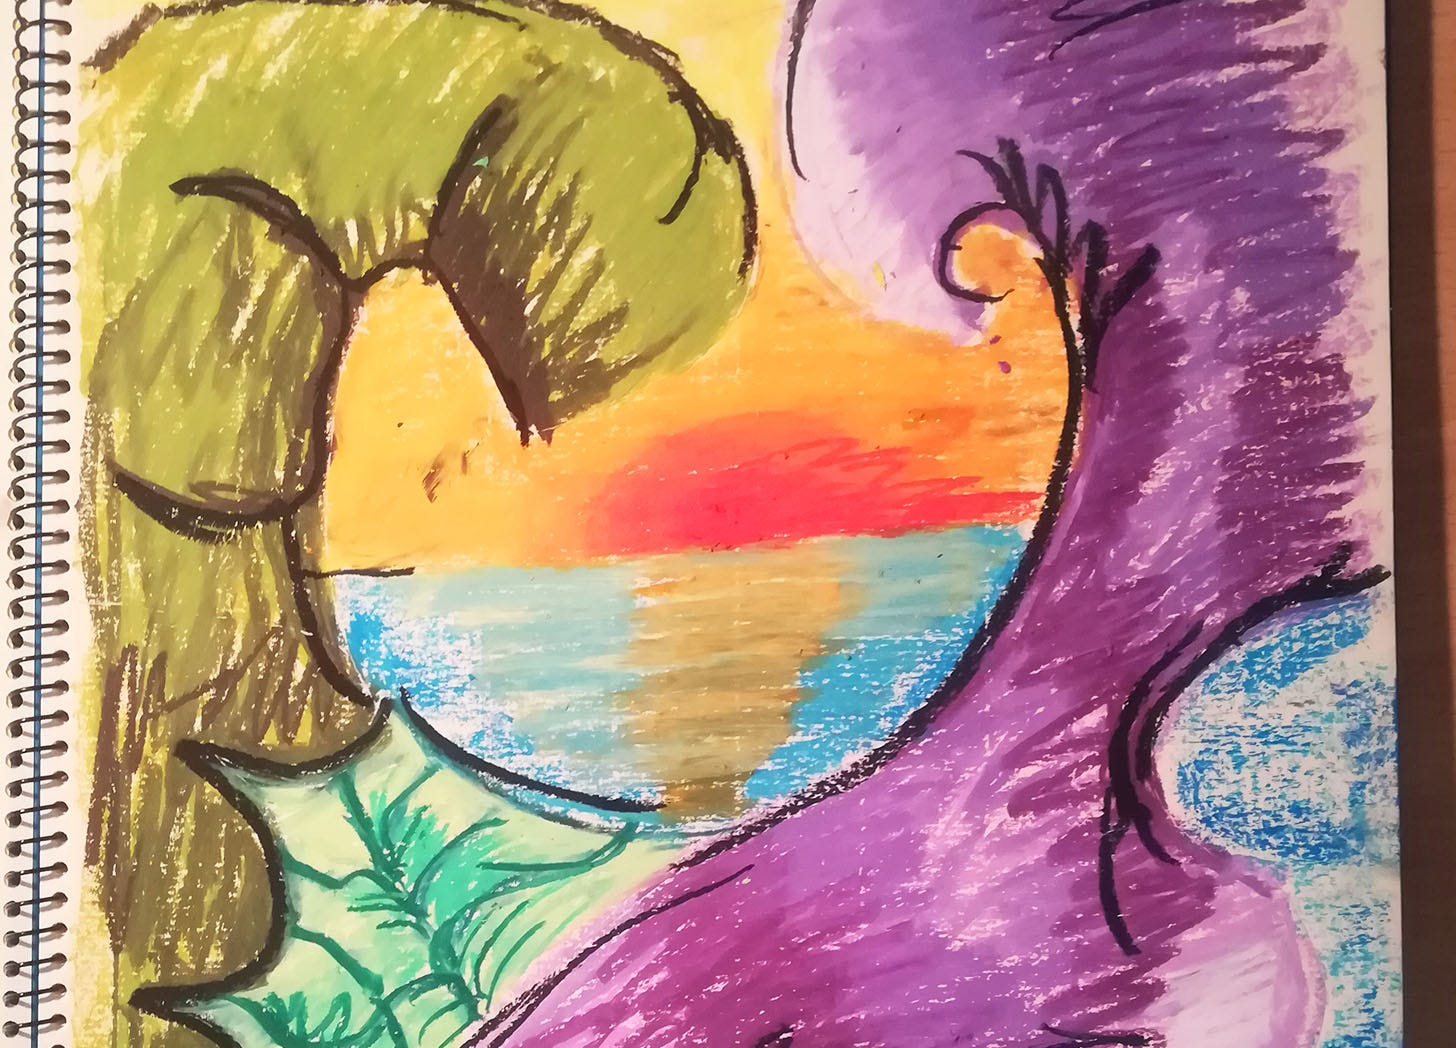 An abstract drawing with two plant-like creatures facing each other, one green, one purple. Another leaf-like shape rests between them. A sun sets into water in the background.